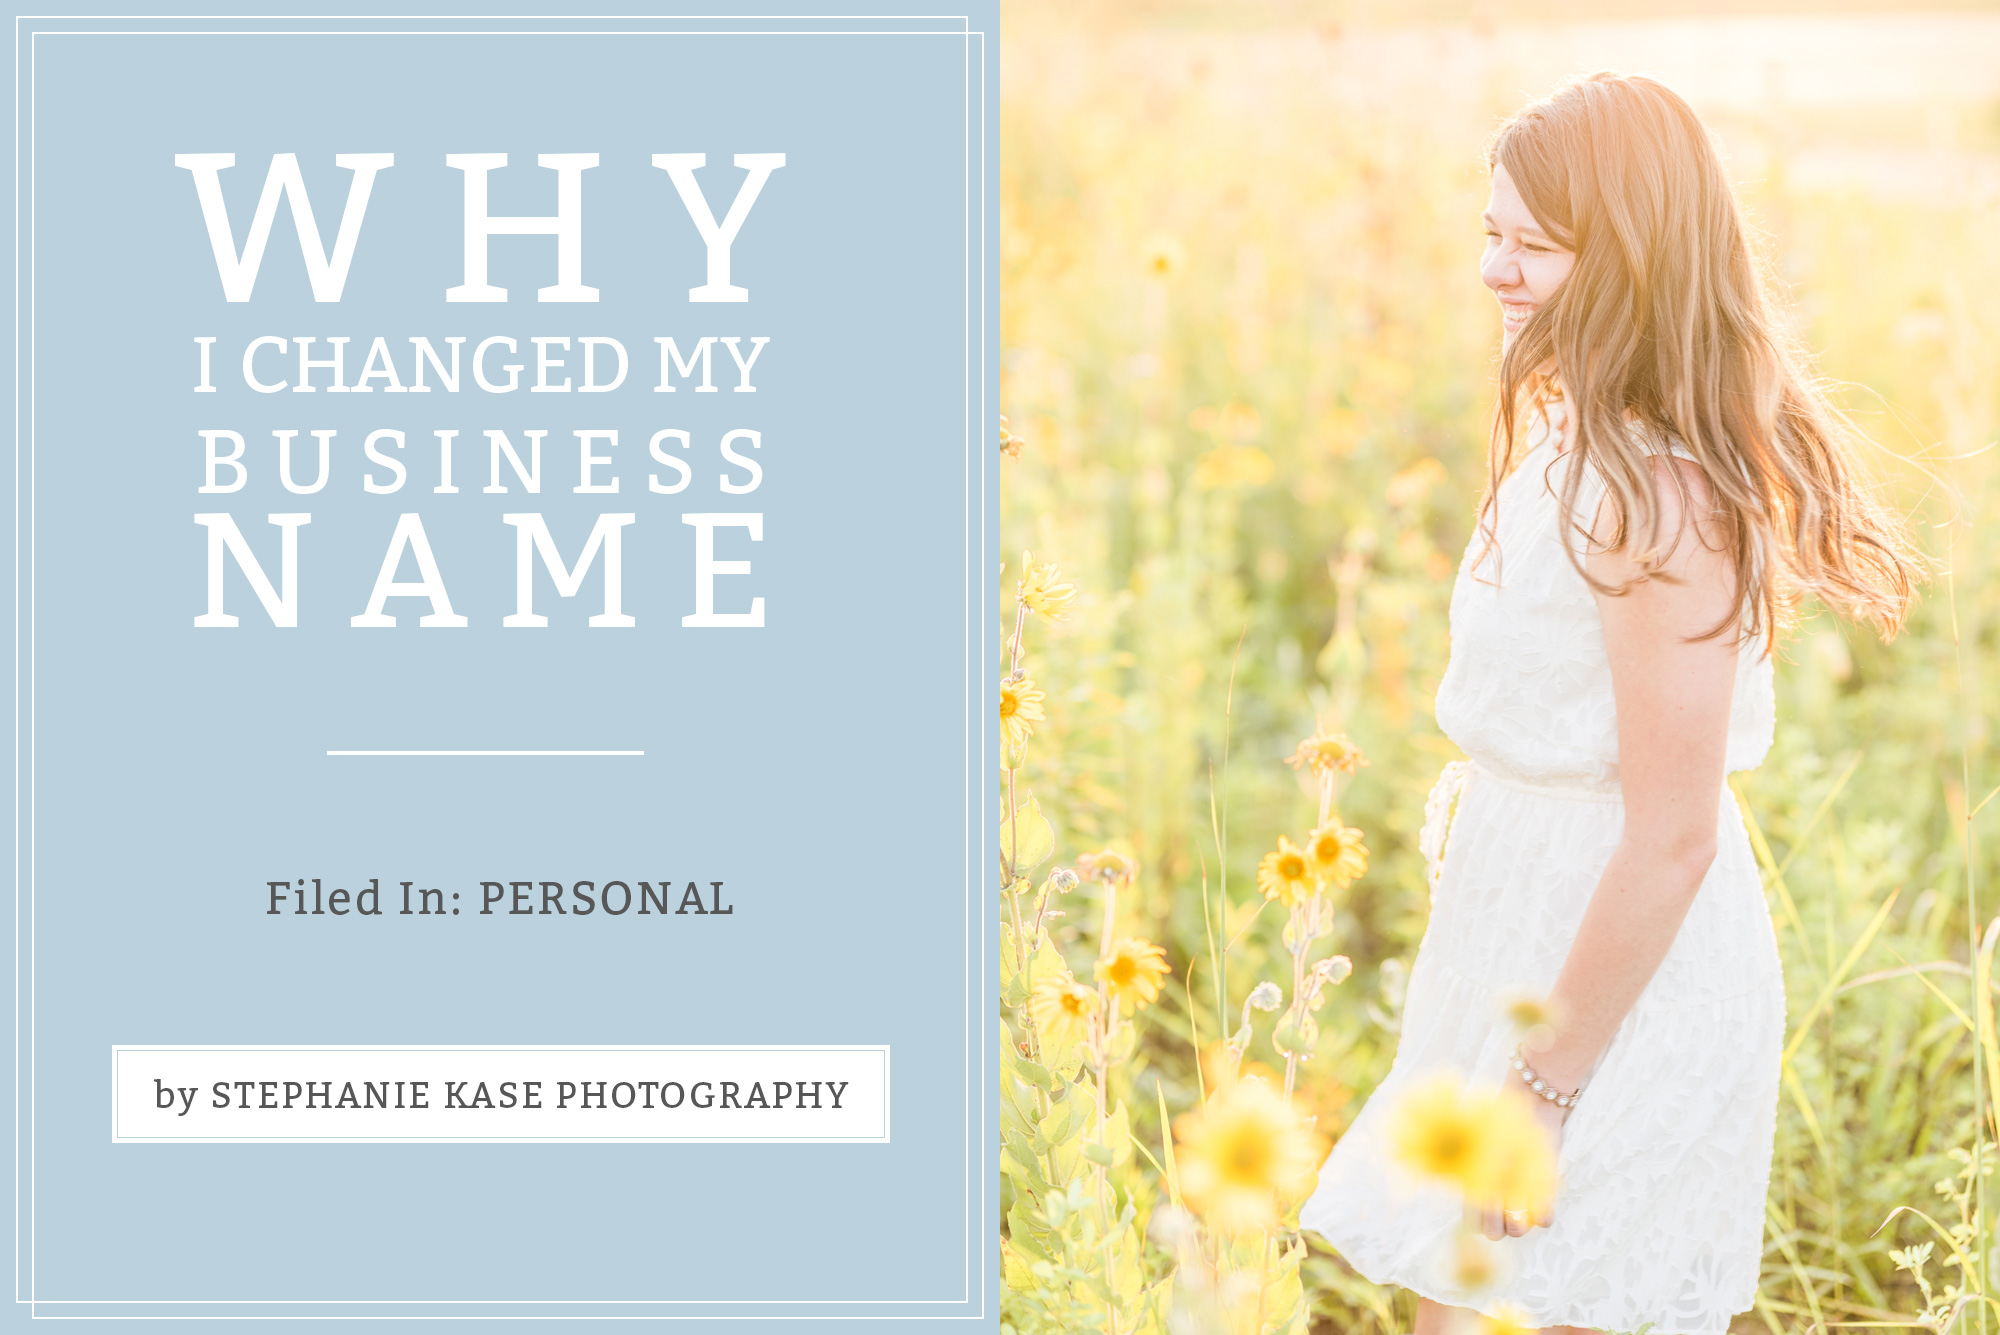 stephanie-brann-to-stephanie-kase-changing-my-photography-business-name-after-getting-married